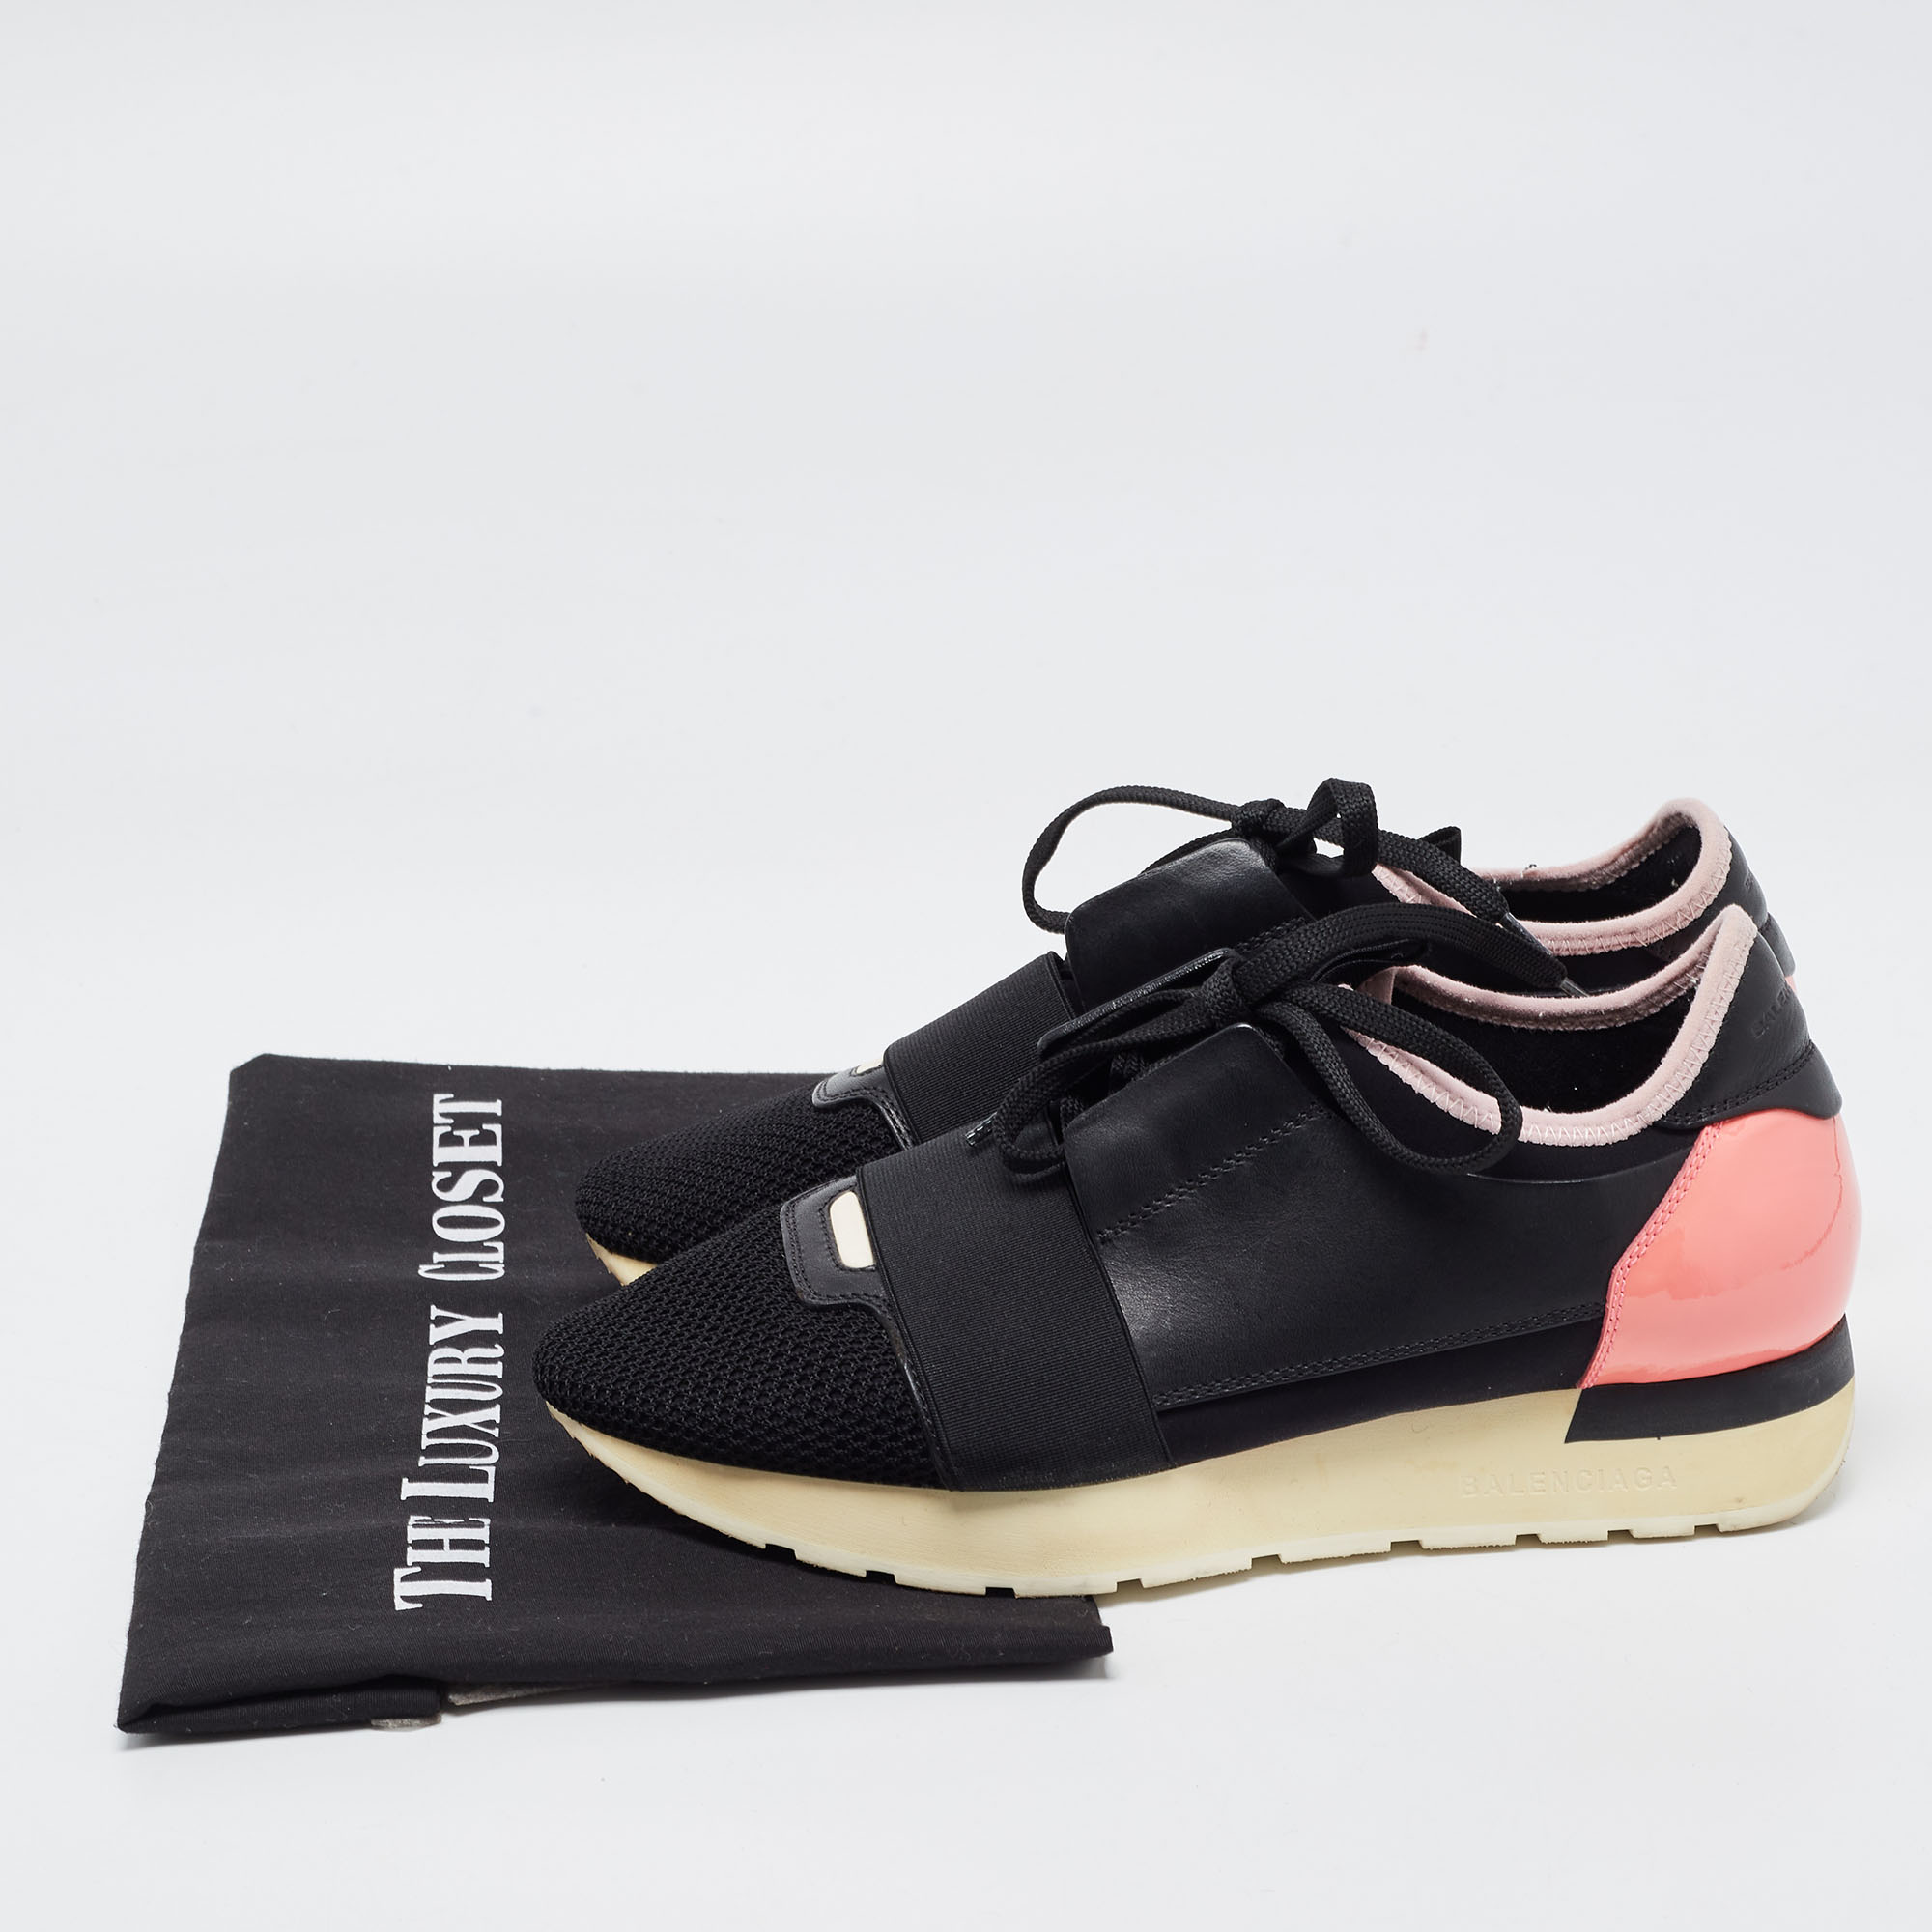 Balenciaga Black/Pink Leather And Mesh Race Runner Sneakers Size 37